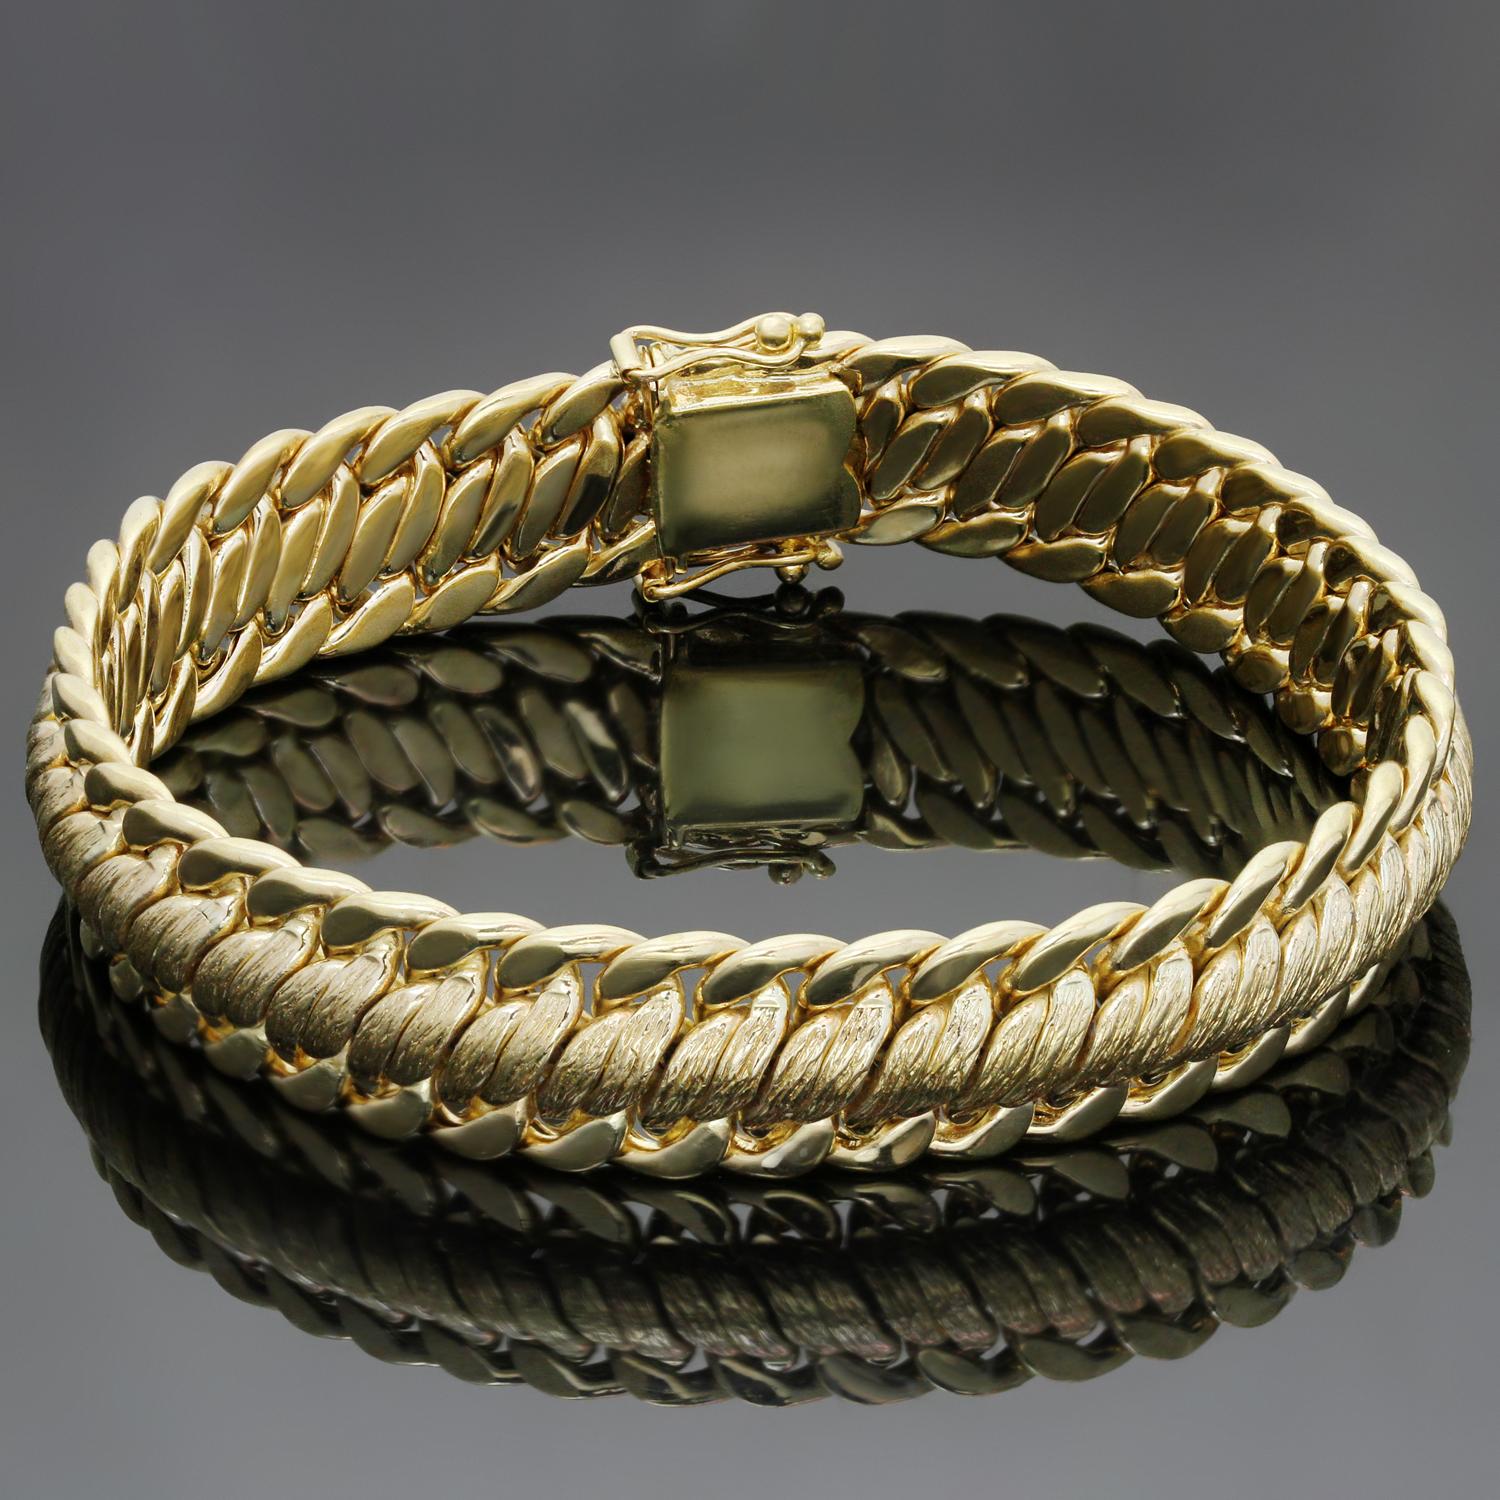 This classic vintage bracelet features an elegant braided link design crafted in multi-textured 18k yellow gold. Made in United States circa 1970s. Measurements: 0.47